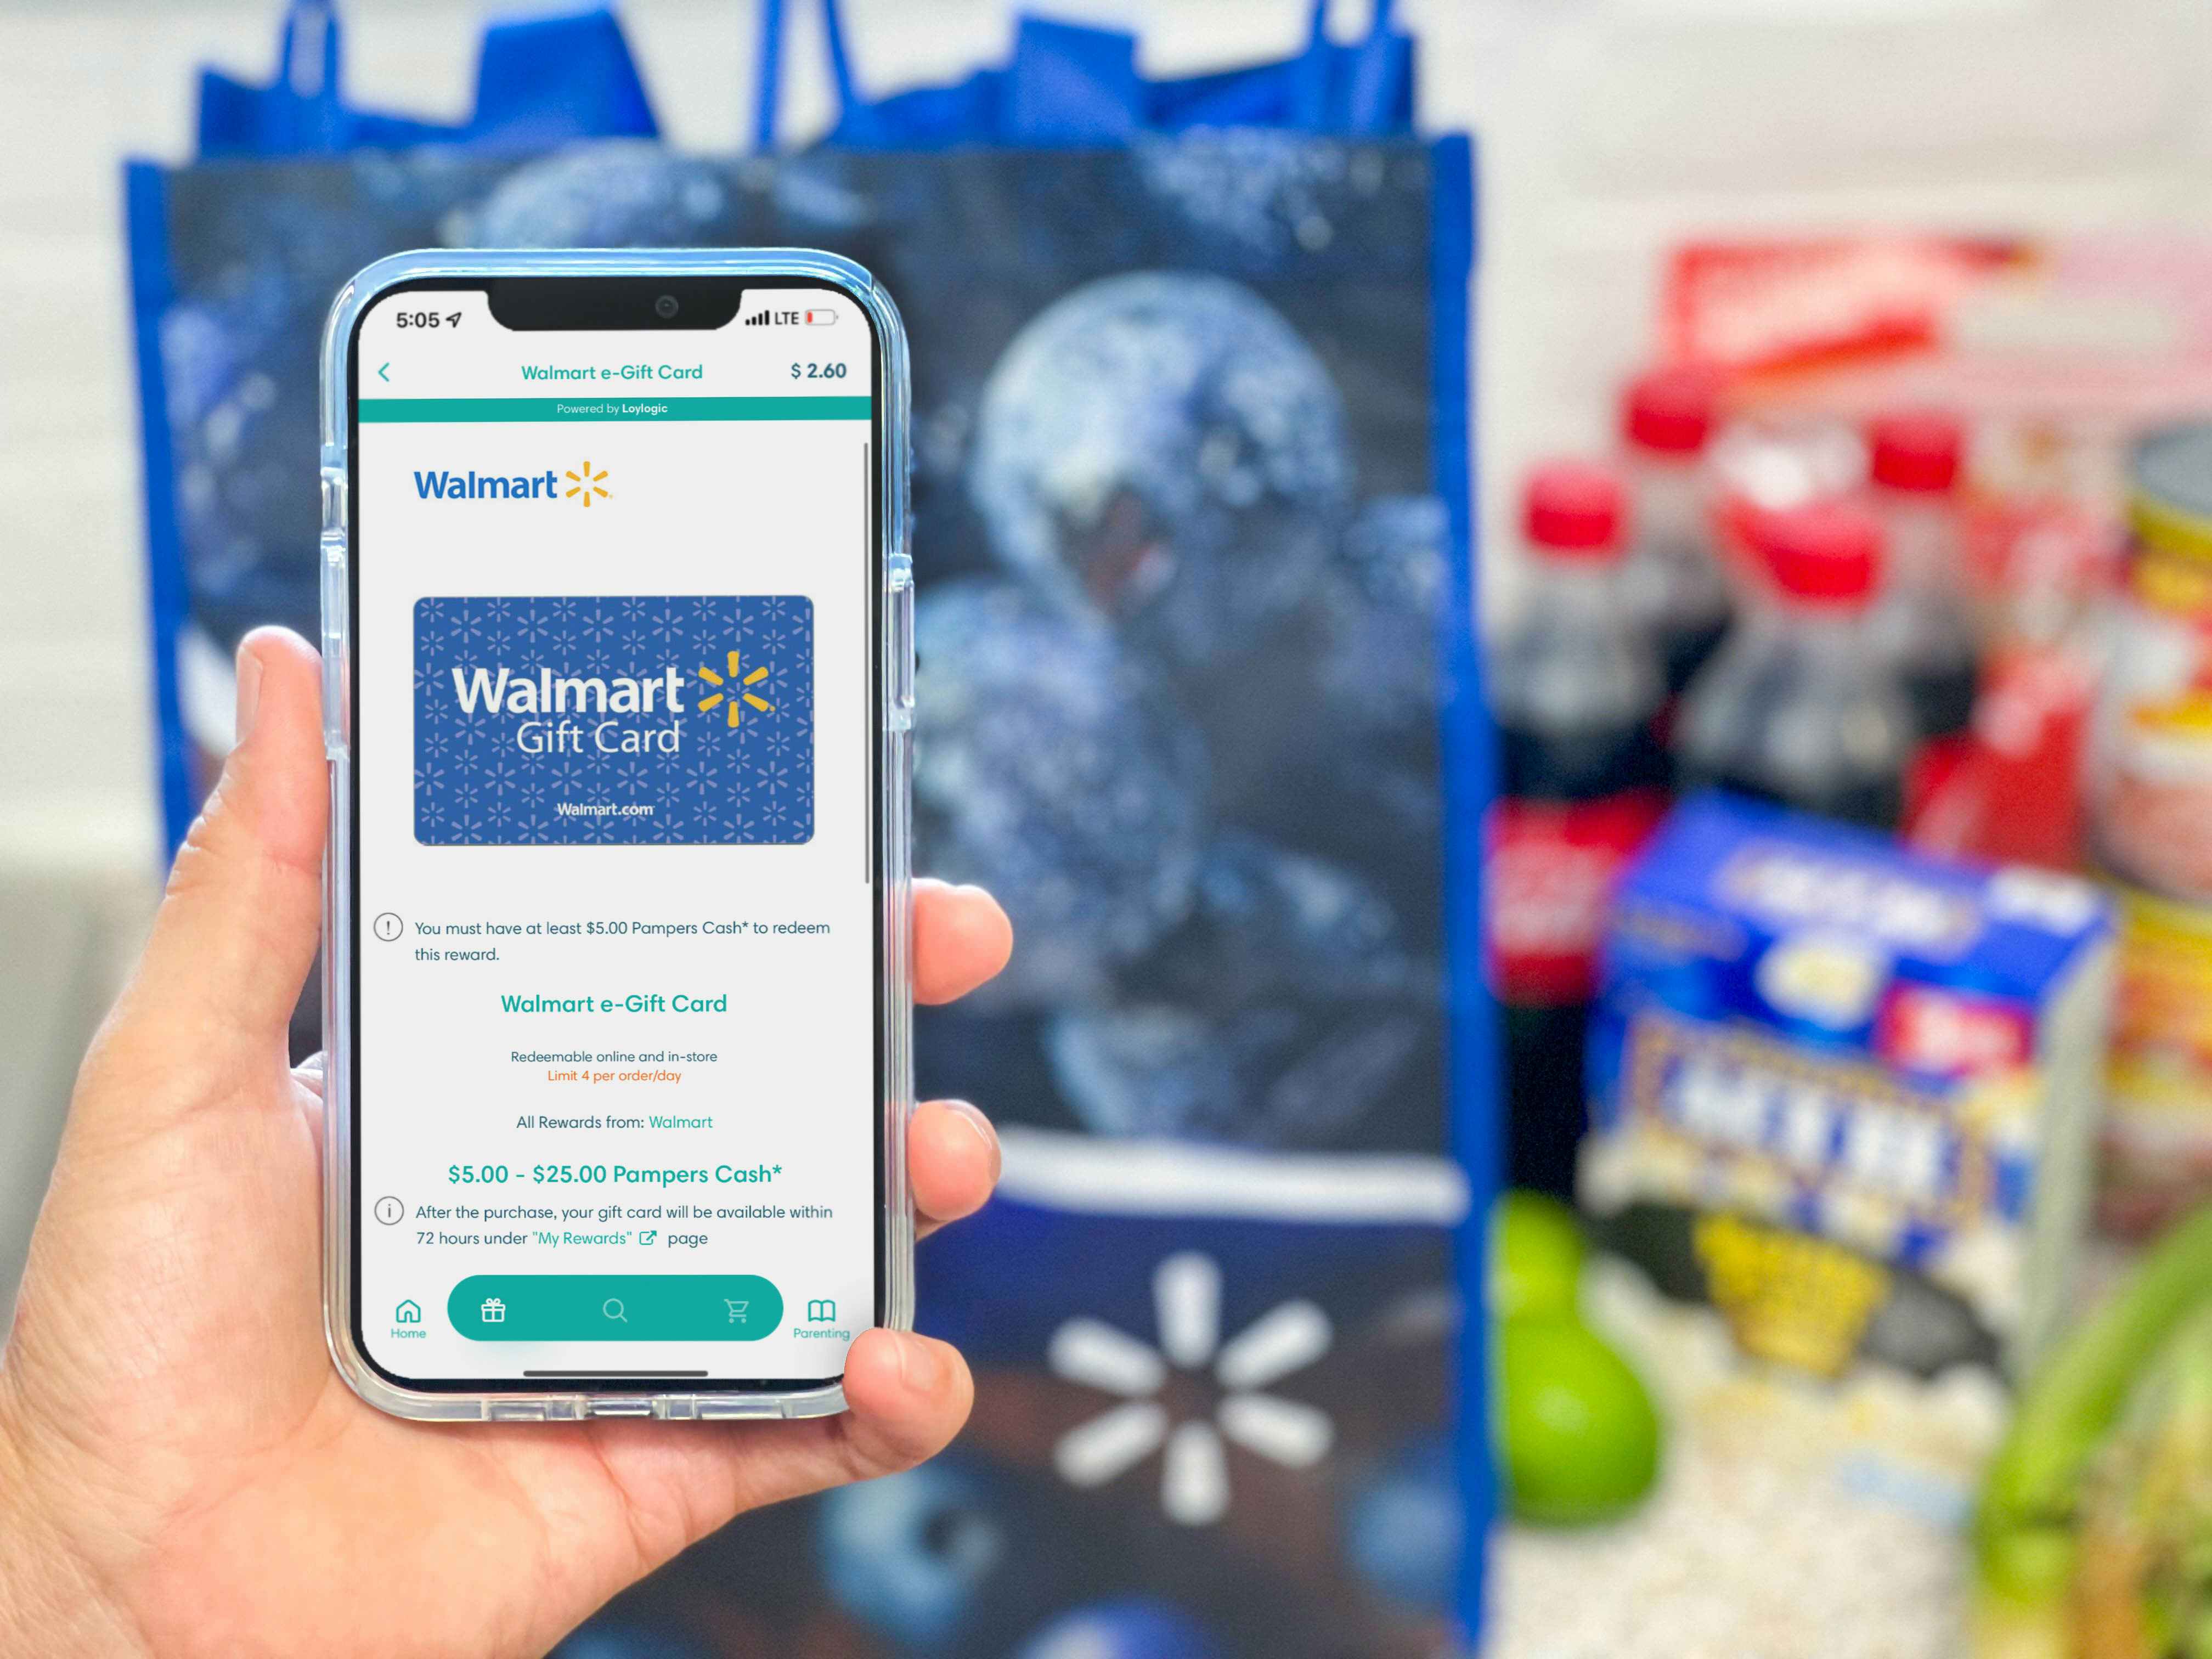 a hand holding a cellphone with pampers rewards app on screen in front of walmart groceries and bag